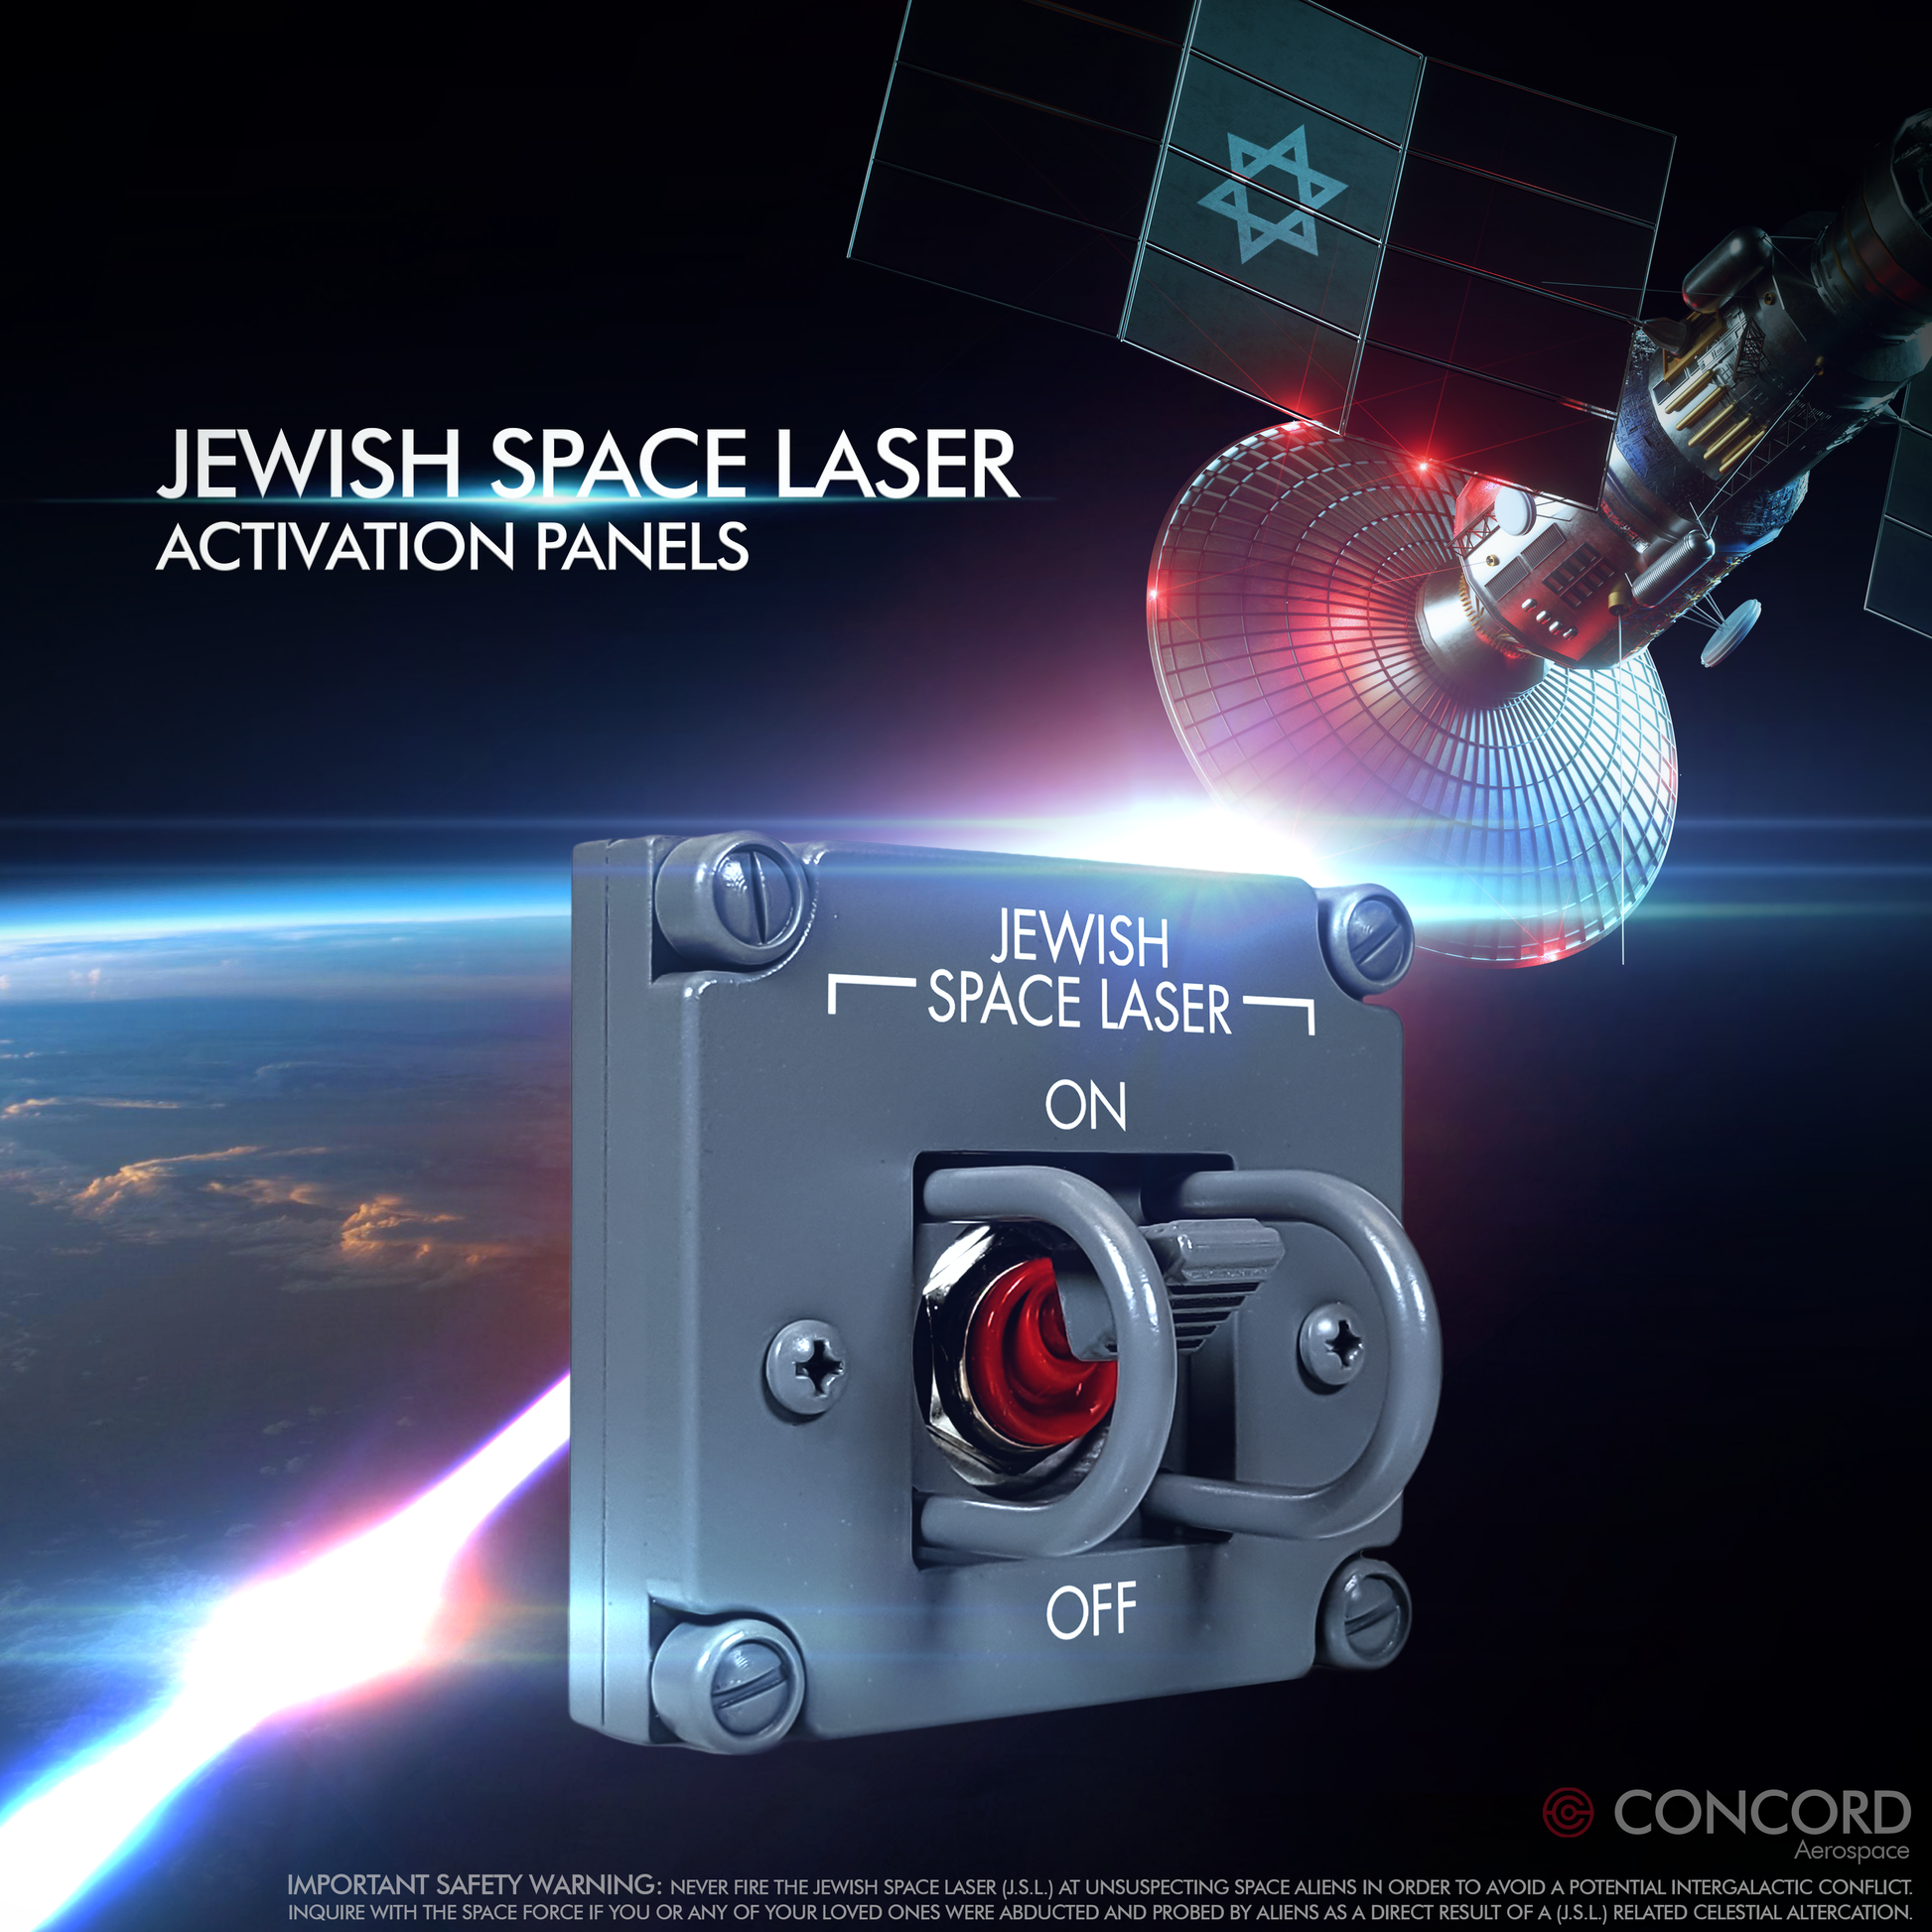 JEWISH SPACE LASER ACTIVATION PANELS - Concord Aerospace OPTION 2 - SINGLE PANEL - ON/OFF Concord Aerospace Concord Aerospace SPACE SWITCH - SINGLE